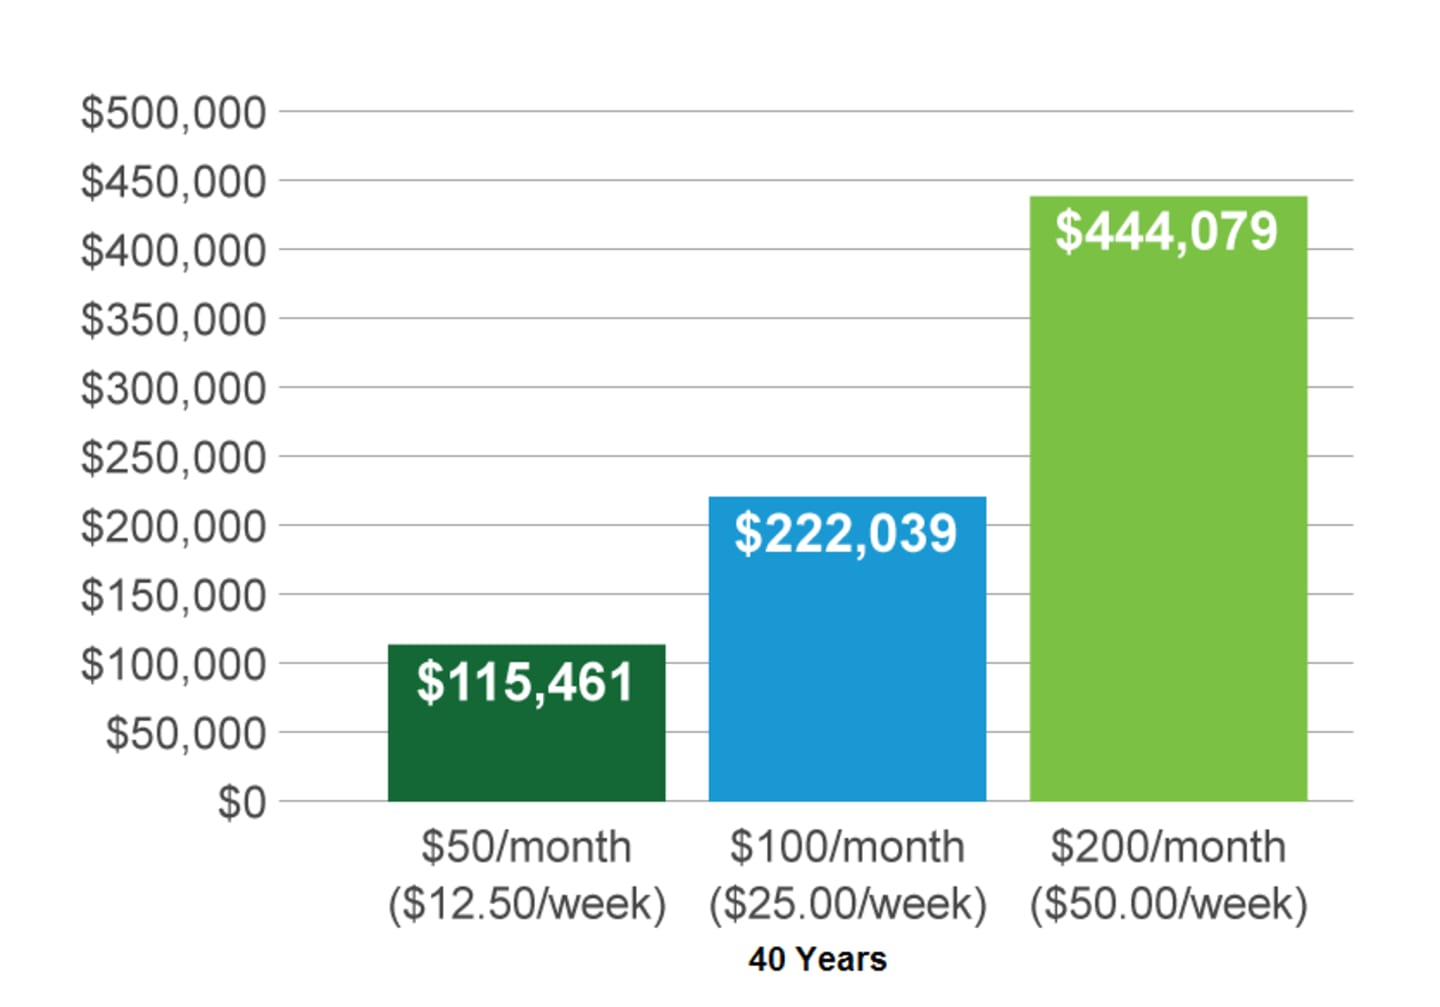 See how investing $50, $100 or $200 a month can pay off.